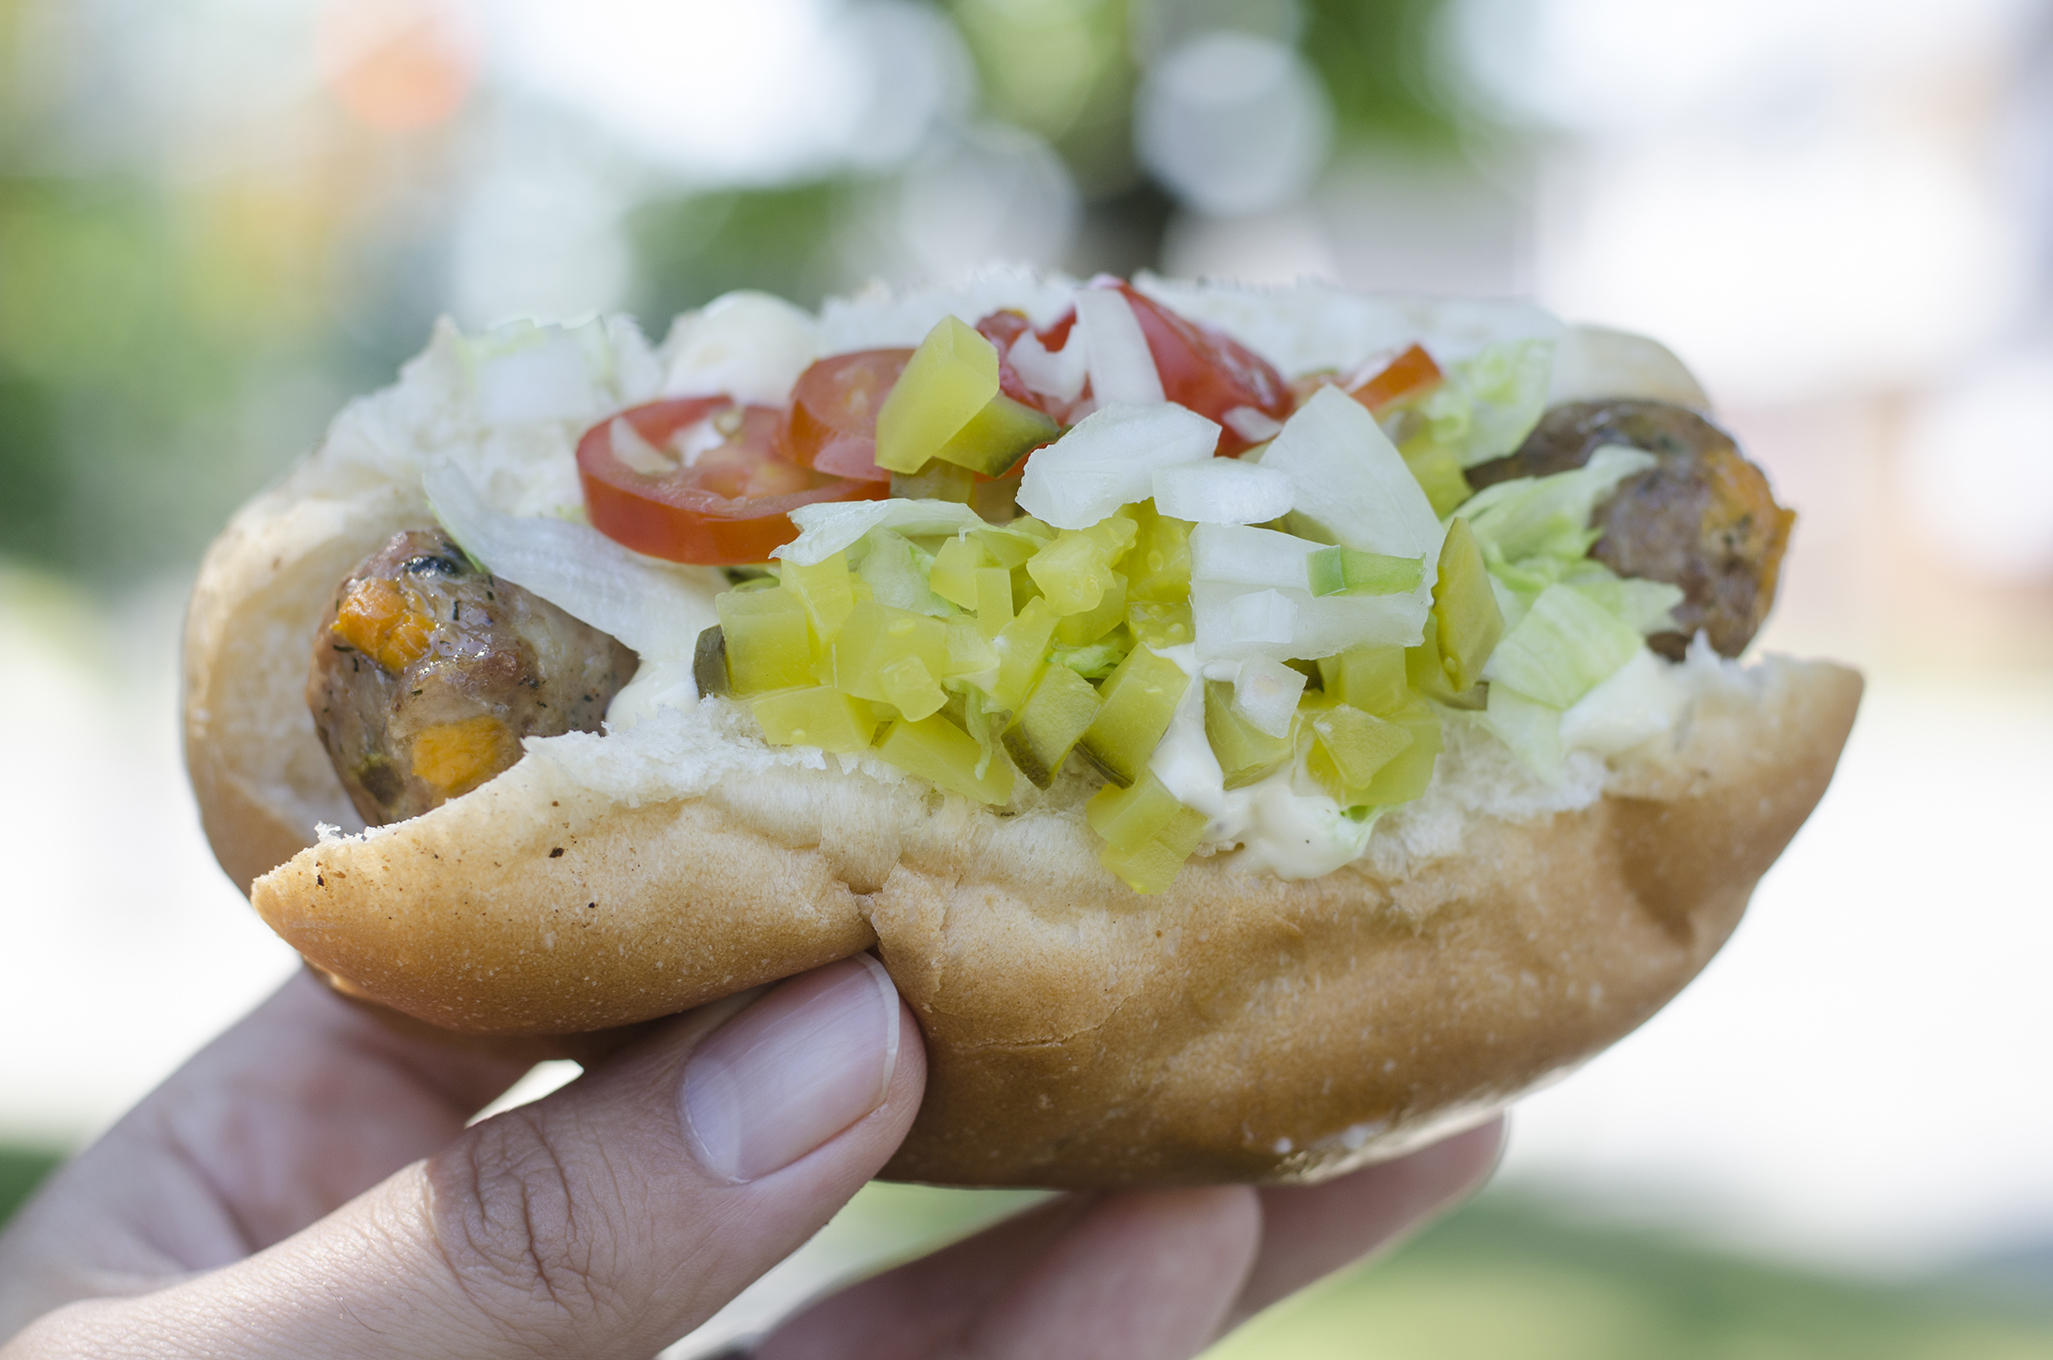 The Bacon Cheeseburger sausage from Robbie's Gourmet Sausage Co. in Windsor, Ontario.